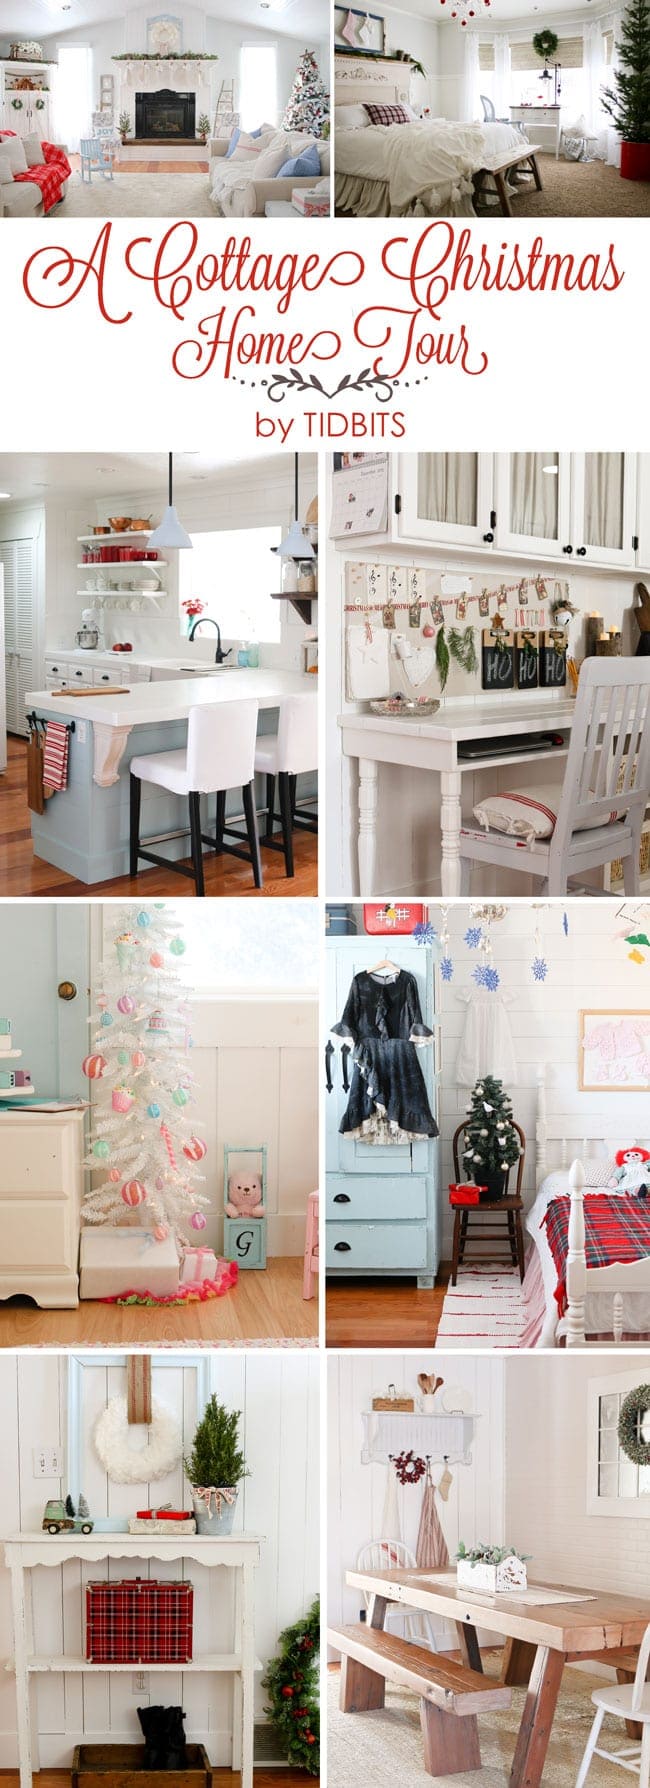 A Cottage Christmas Home Tour - Find inspiration your Christmas decorating on a budget. Home Tour part of Jeniffer Rizzo Holiday Housewalk 2015